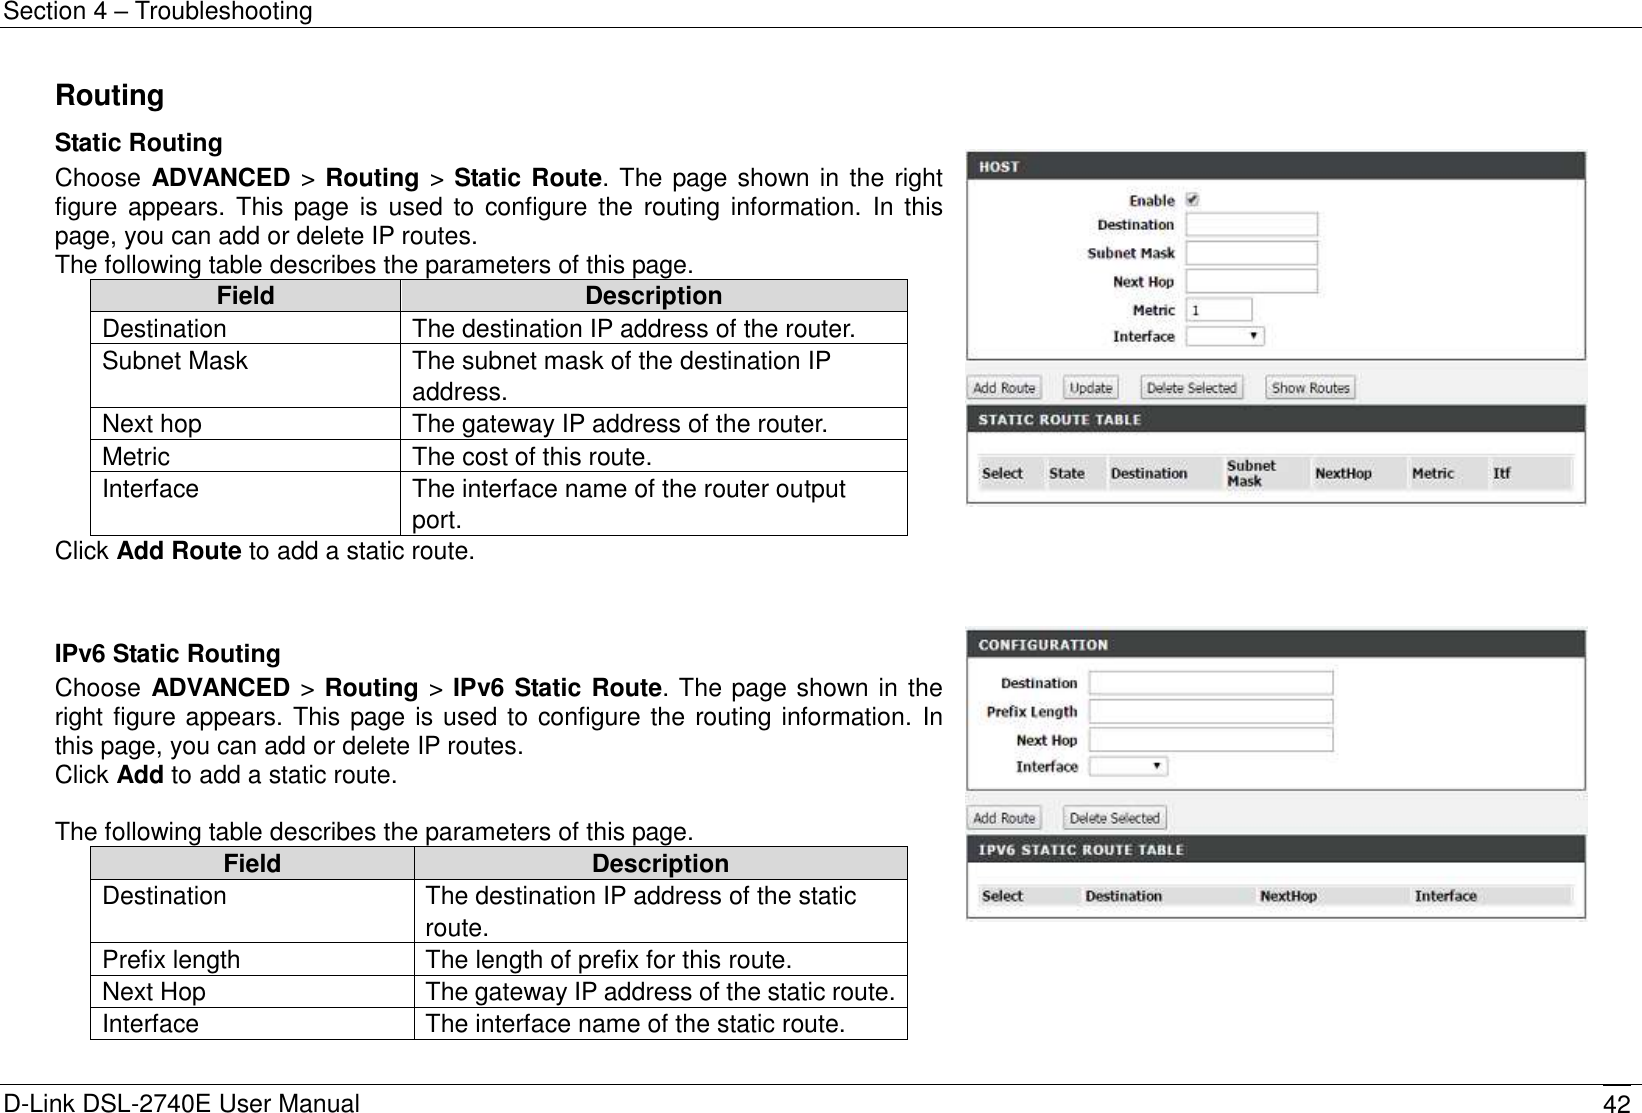 Section 4 – Troubleshooting D-Link DSL-2740E User Manual 42 Routing Static Routing Choose ADVANCED &gt; Routing &gt; Static Route. The page shown in the right figure  appears. This page is used to configure the routing information.  In this page, you can add or delete IP routes. The following table describes the parameters of this page. Field Description Destination   The destination IP address of the router. Subnet Mask The subnet mask of the destination IP address. Next hop The gateway IP address of the router. Metric The cost of this route. Interface The interface name of the router output port. Click Add Route to add a static route.        IPv6 Static Routing Choose ADVANCED &gt; Routing &gt; IPv6 Static Route. The page shown in the right figure appears. This page is used to configure the routing information. In this page, you can add or delete IP routes. Click Add to add a static route.    The following table describes the parameters of this page. Field Description Destination The destination IP address of the static route. Prefix length The length of prefix for this route. Next Hop The gateway IP address of the static route. Interface The interface name of the static route.   